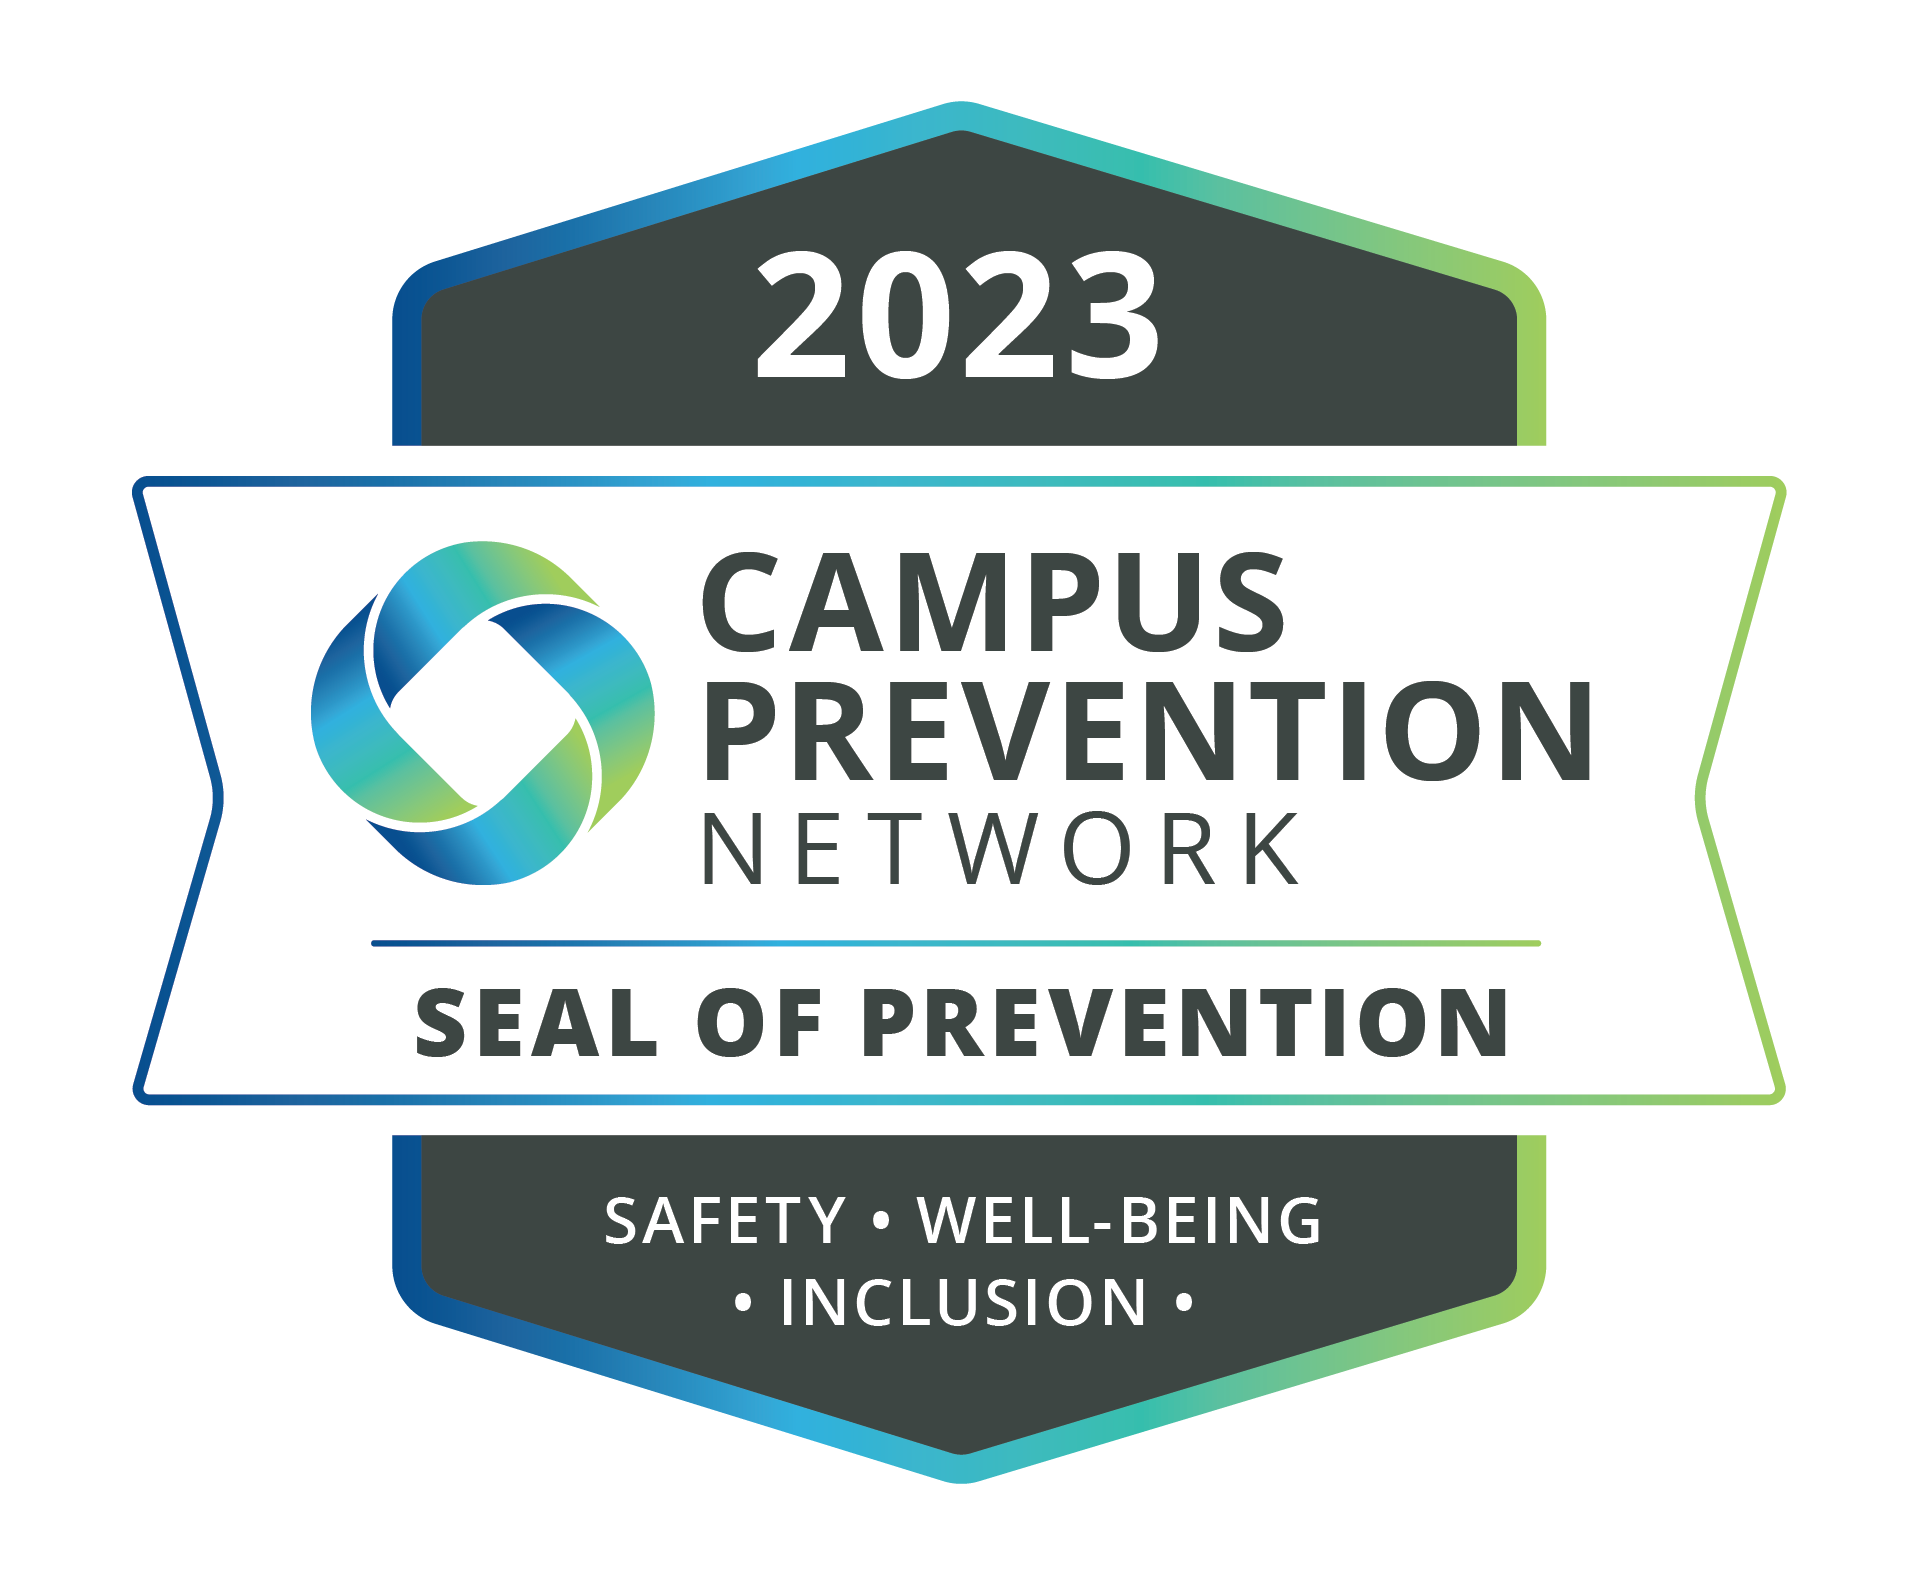 2023 Campus Prevention Network: Seal of Prevention - Safety, Well-being, Inclusion